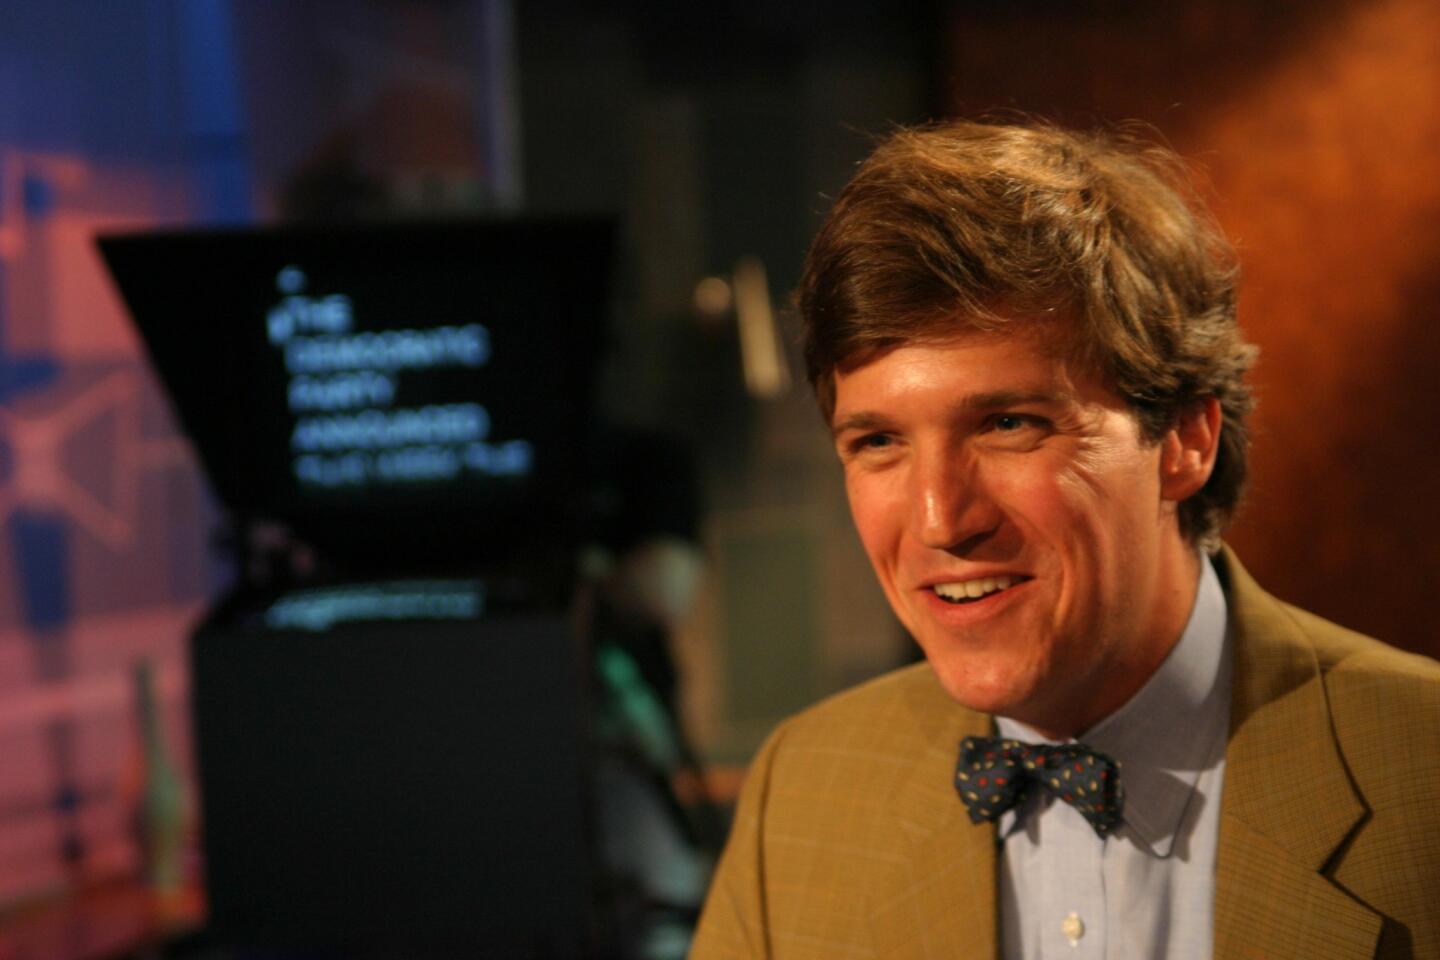 While the primary reason for "Tucker's" cancellation after three seasons was low ratings, Carlson stated that his network, MSNBC, had changed, and "they didn't have a role for me."